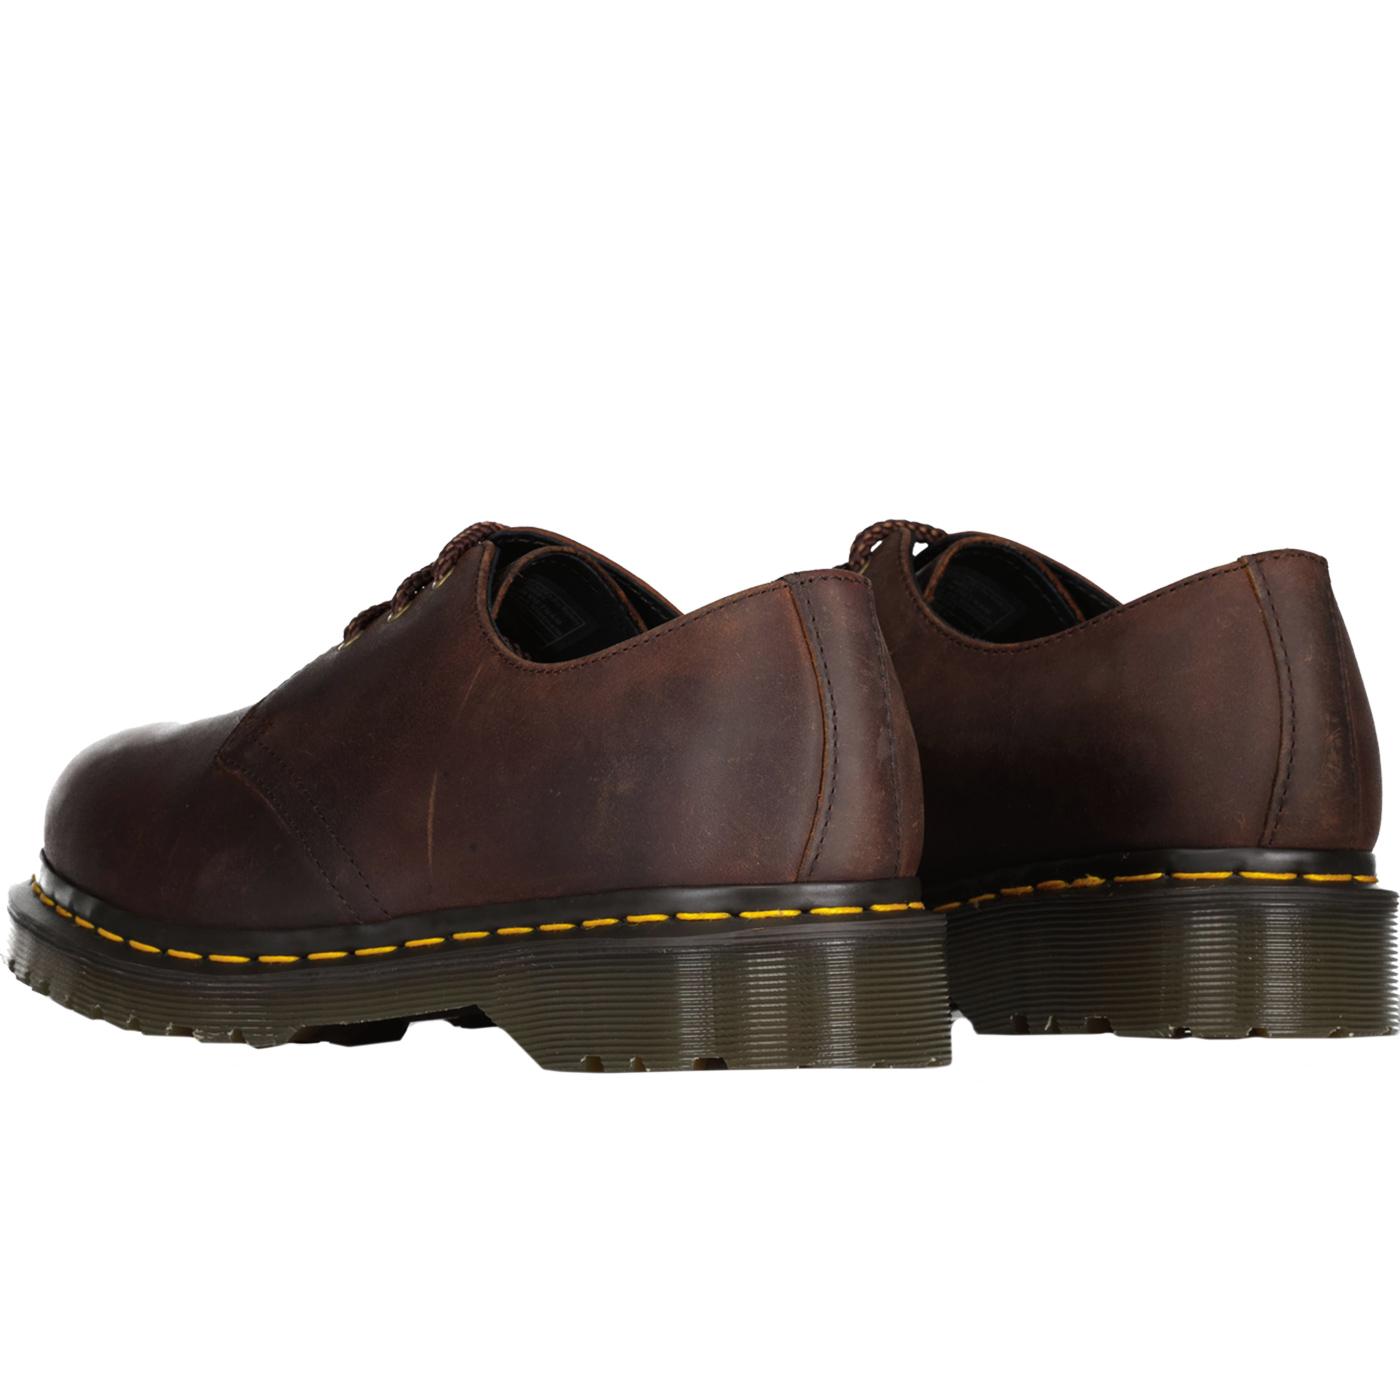 1461 Dr Martens Waxed Full Grain Leather Shoes in Brown